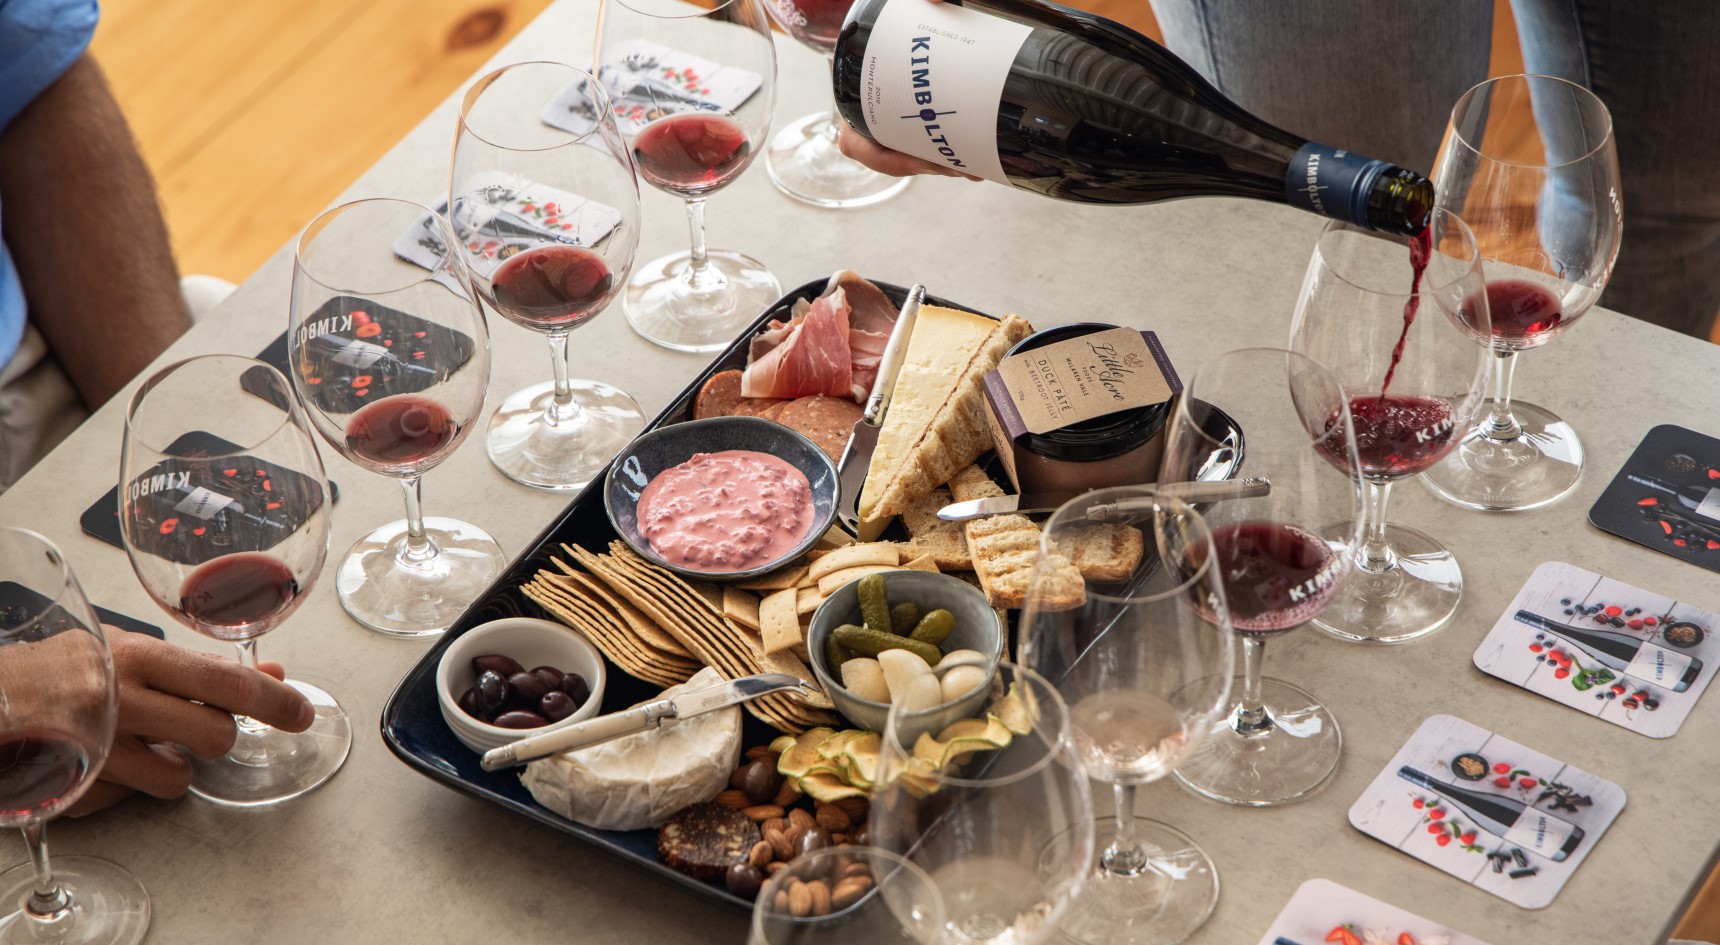 Kimbolton Wines' decadent tasting platters are a must in the Fleurieu. Image: SATC/Duy Dash